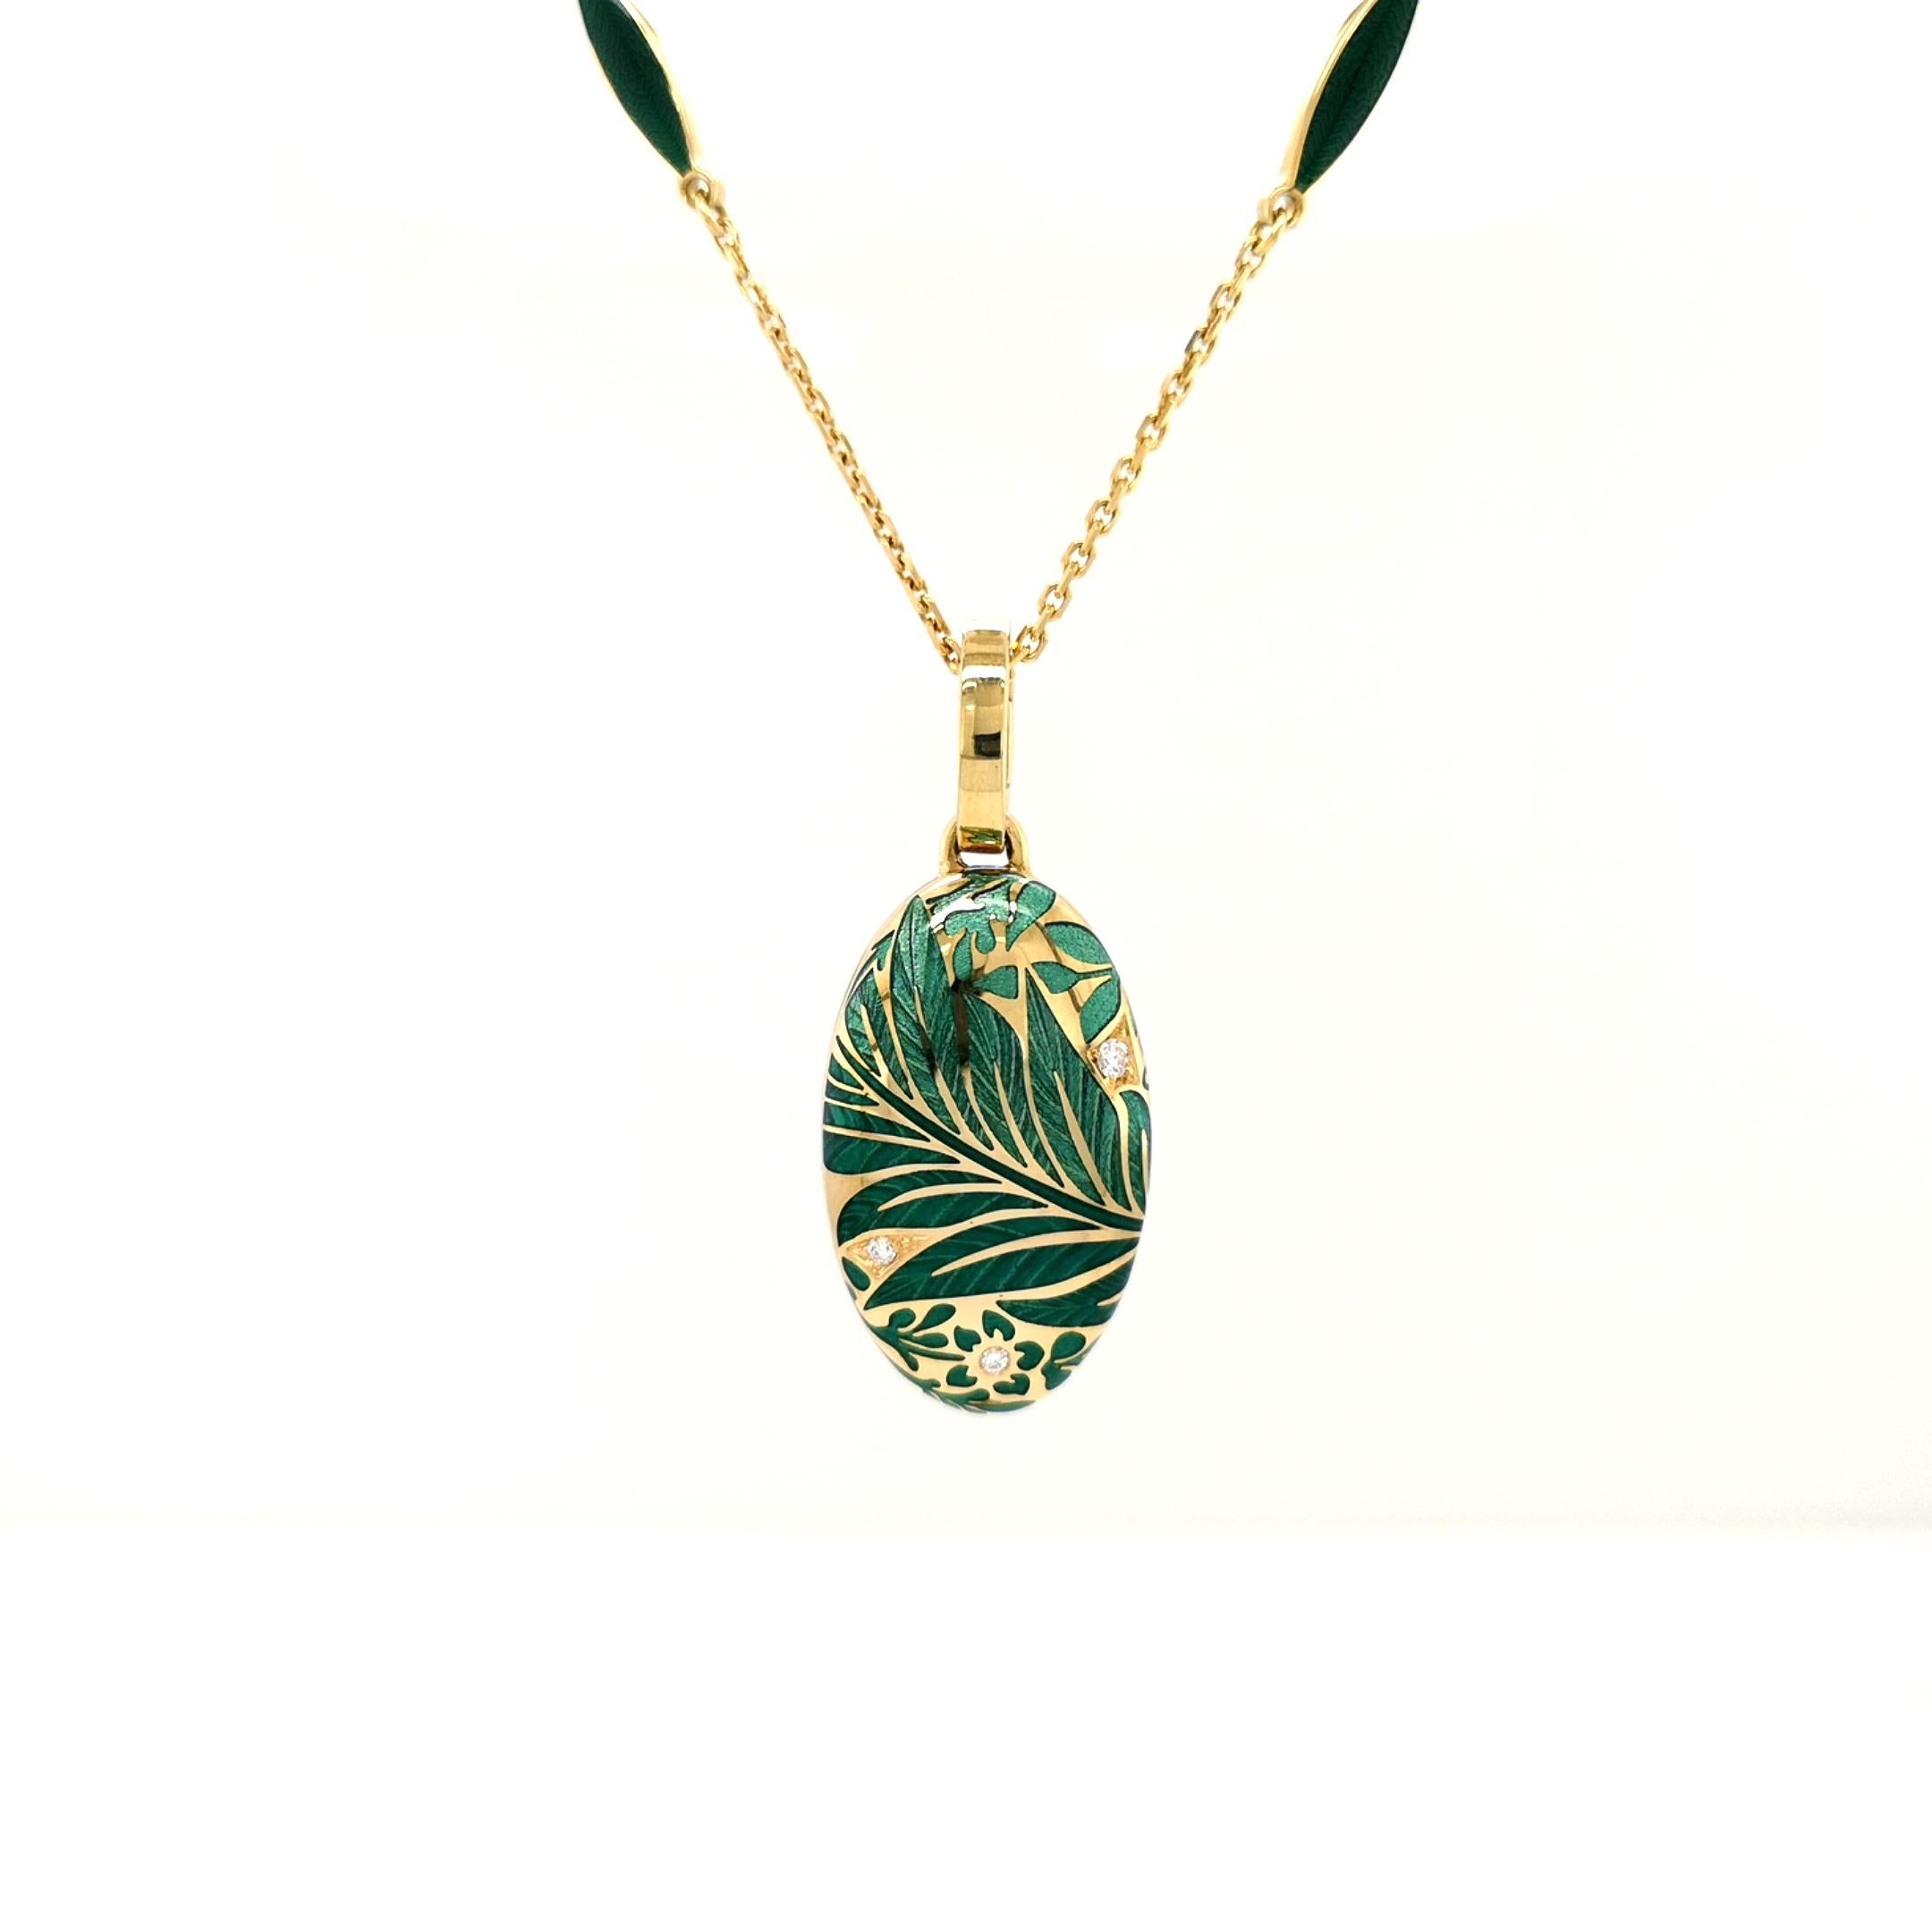 Victor Mayer oval pendant locket necklace 18k yellow gold, emerald turquoise vitreous enamel, 3 diamonds, total 0.04 ct G VS, brilliant cut, measurements app. 24.5 mm x 15.0 mm

About the creator Victor Mayer
Victor Mayer is internationally renowned